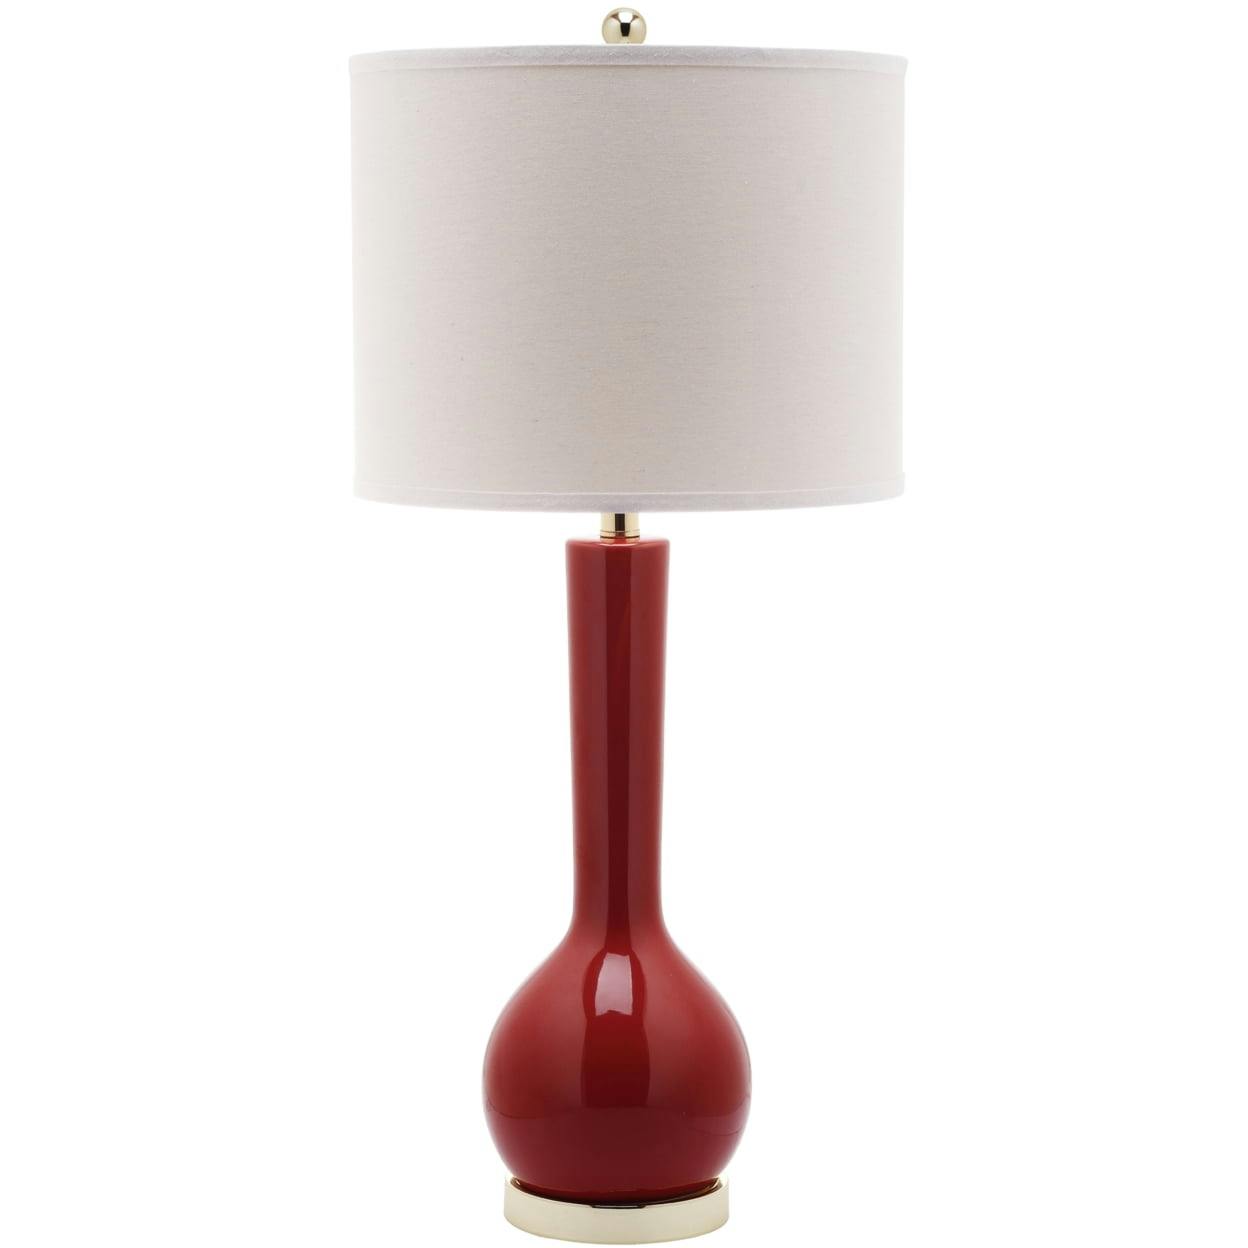 Elegant Red Ceramic Gourd Table Lamp with Off-White Shade